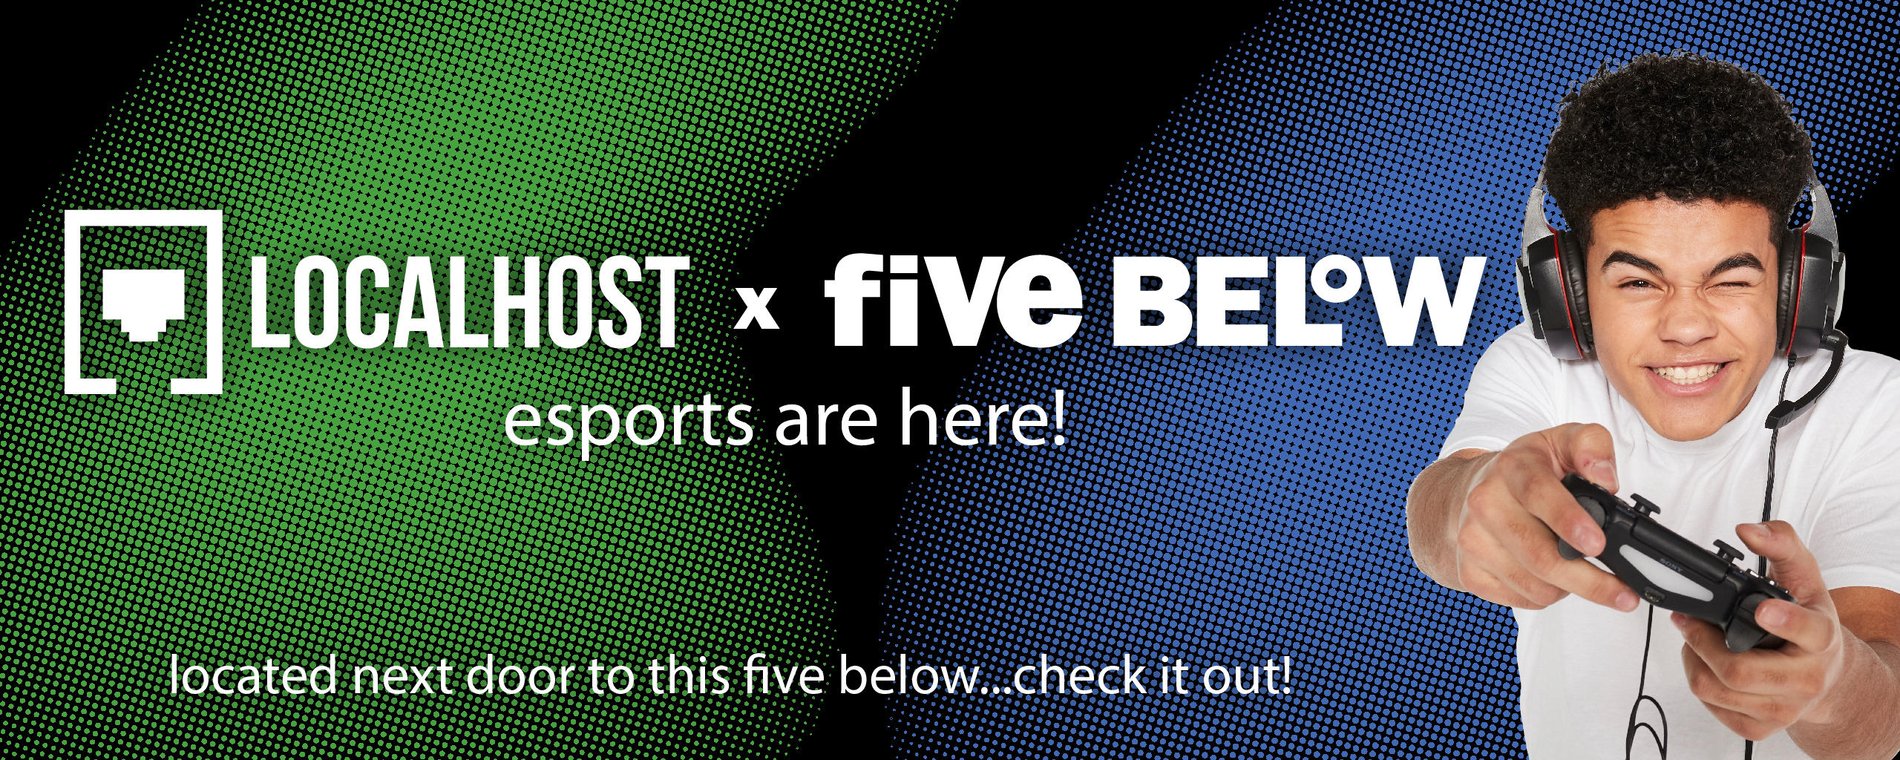 Localhost x five below - esports are here! located next door to this five below...check it out!